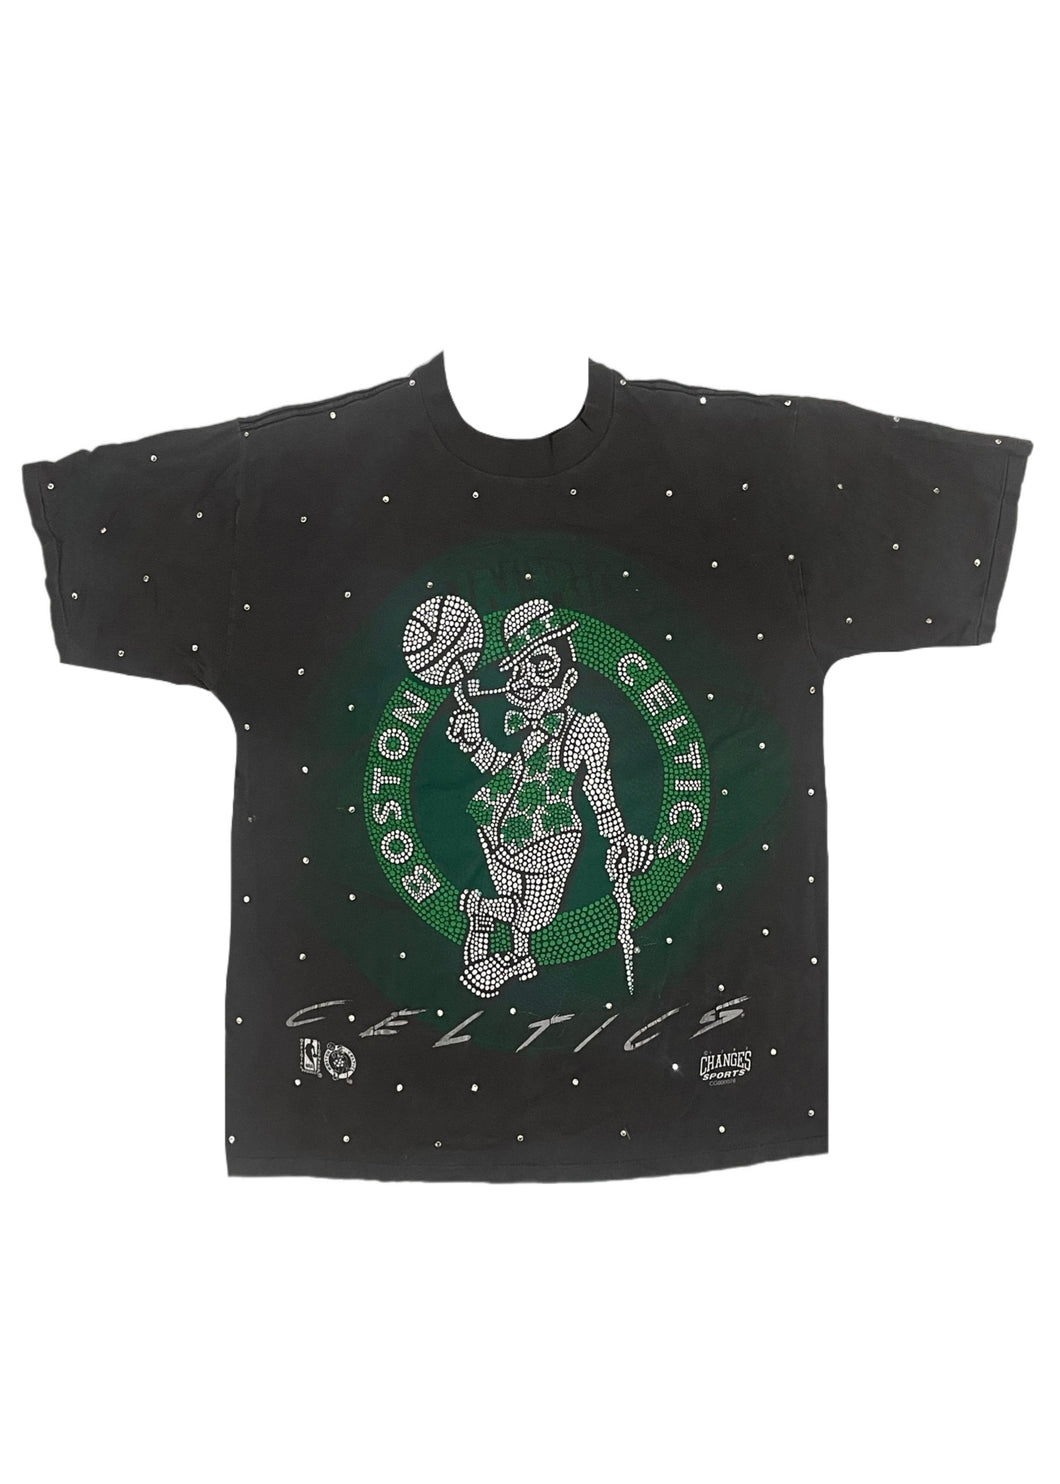 Boston Celtics, NBA One of a KIND Vintage Tee with Overall Crystal Design